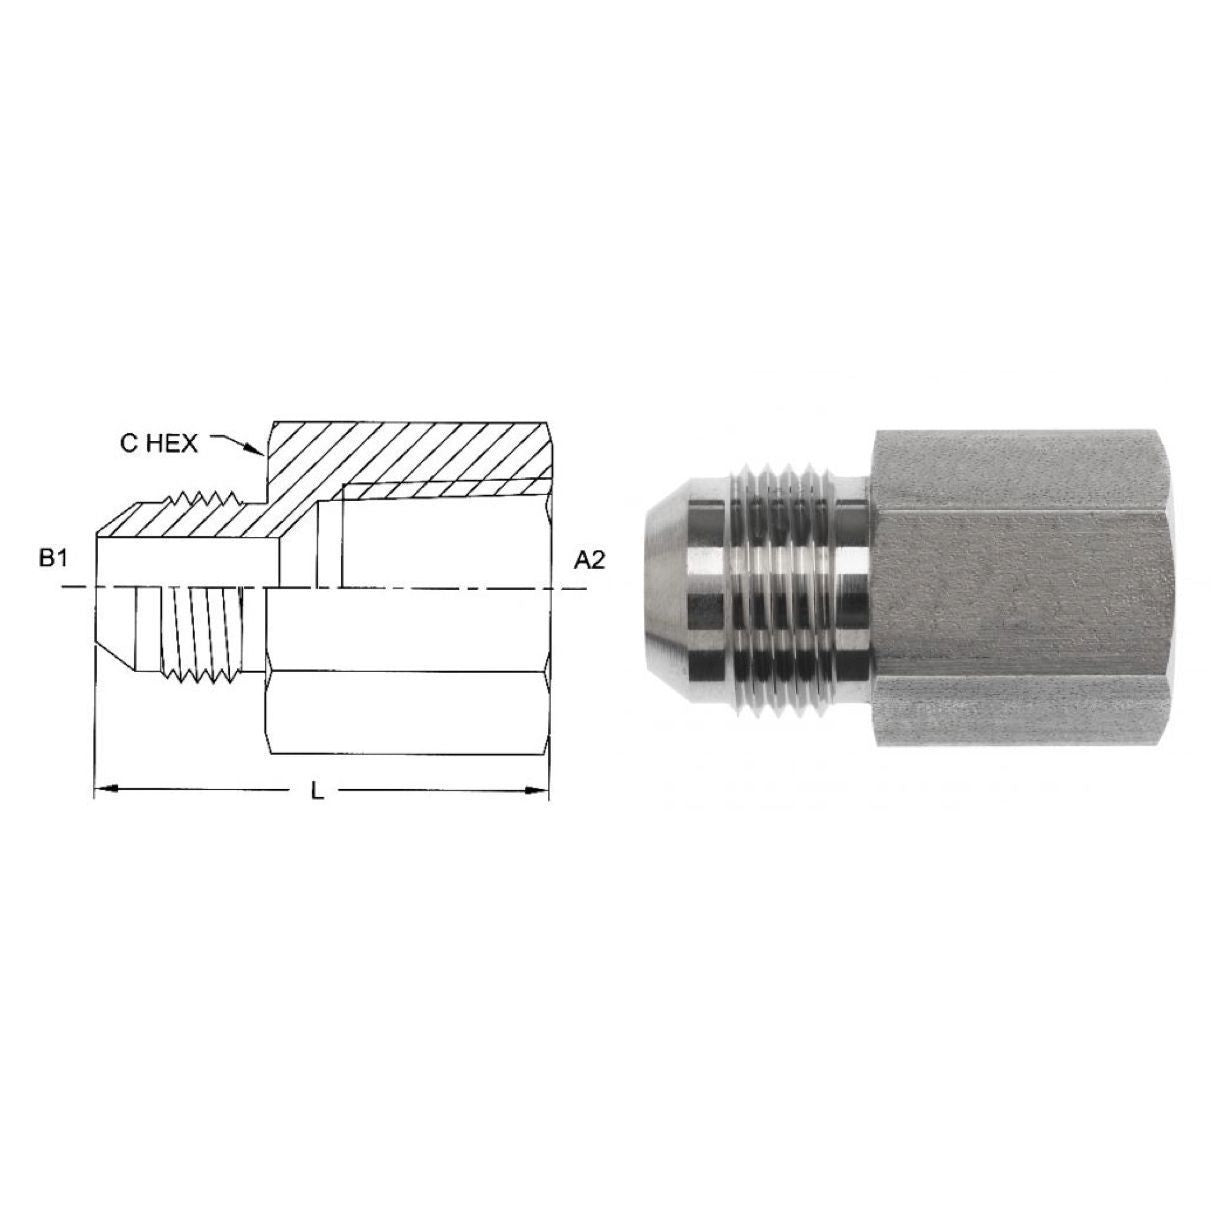 2405-12-16 : OneHydraulics Adapter, Straight, 0.75 (3/4") Male NPT x 1" Female, Steel, 3000psi